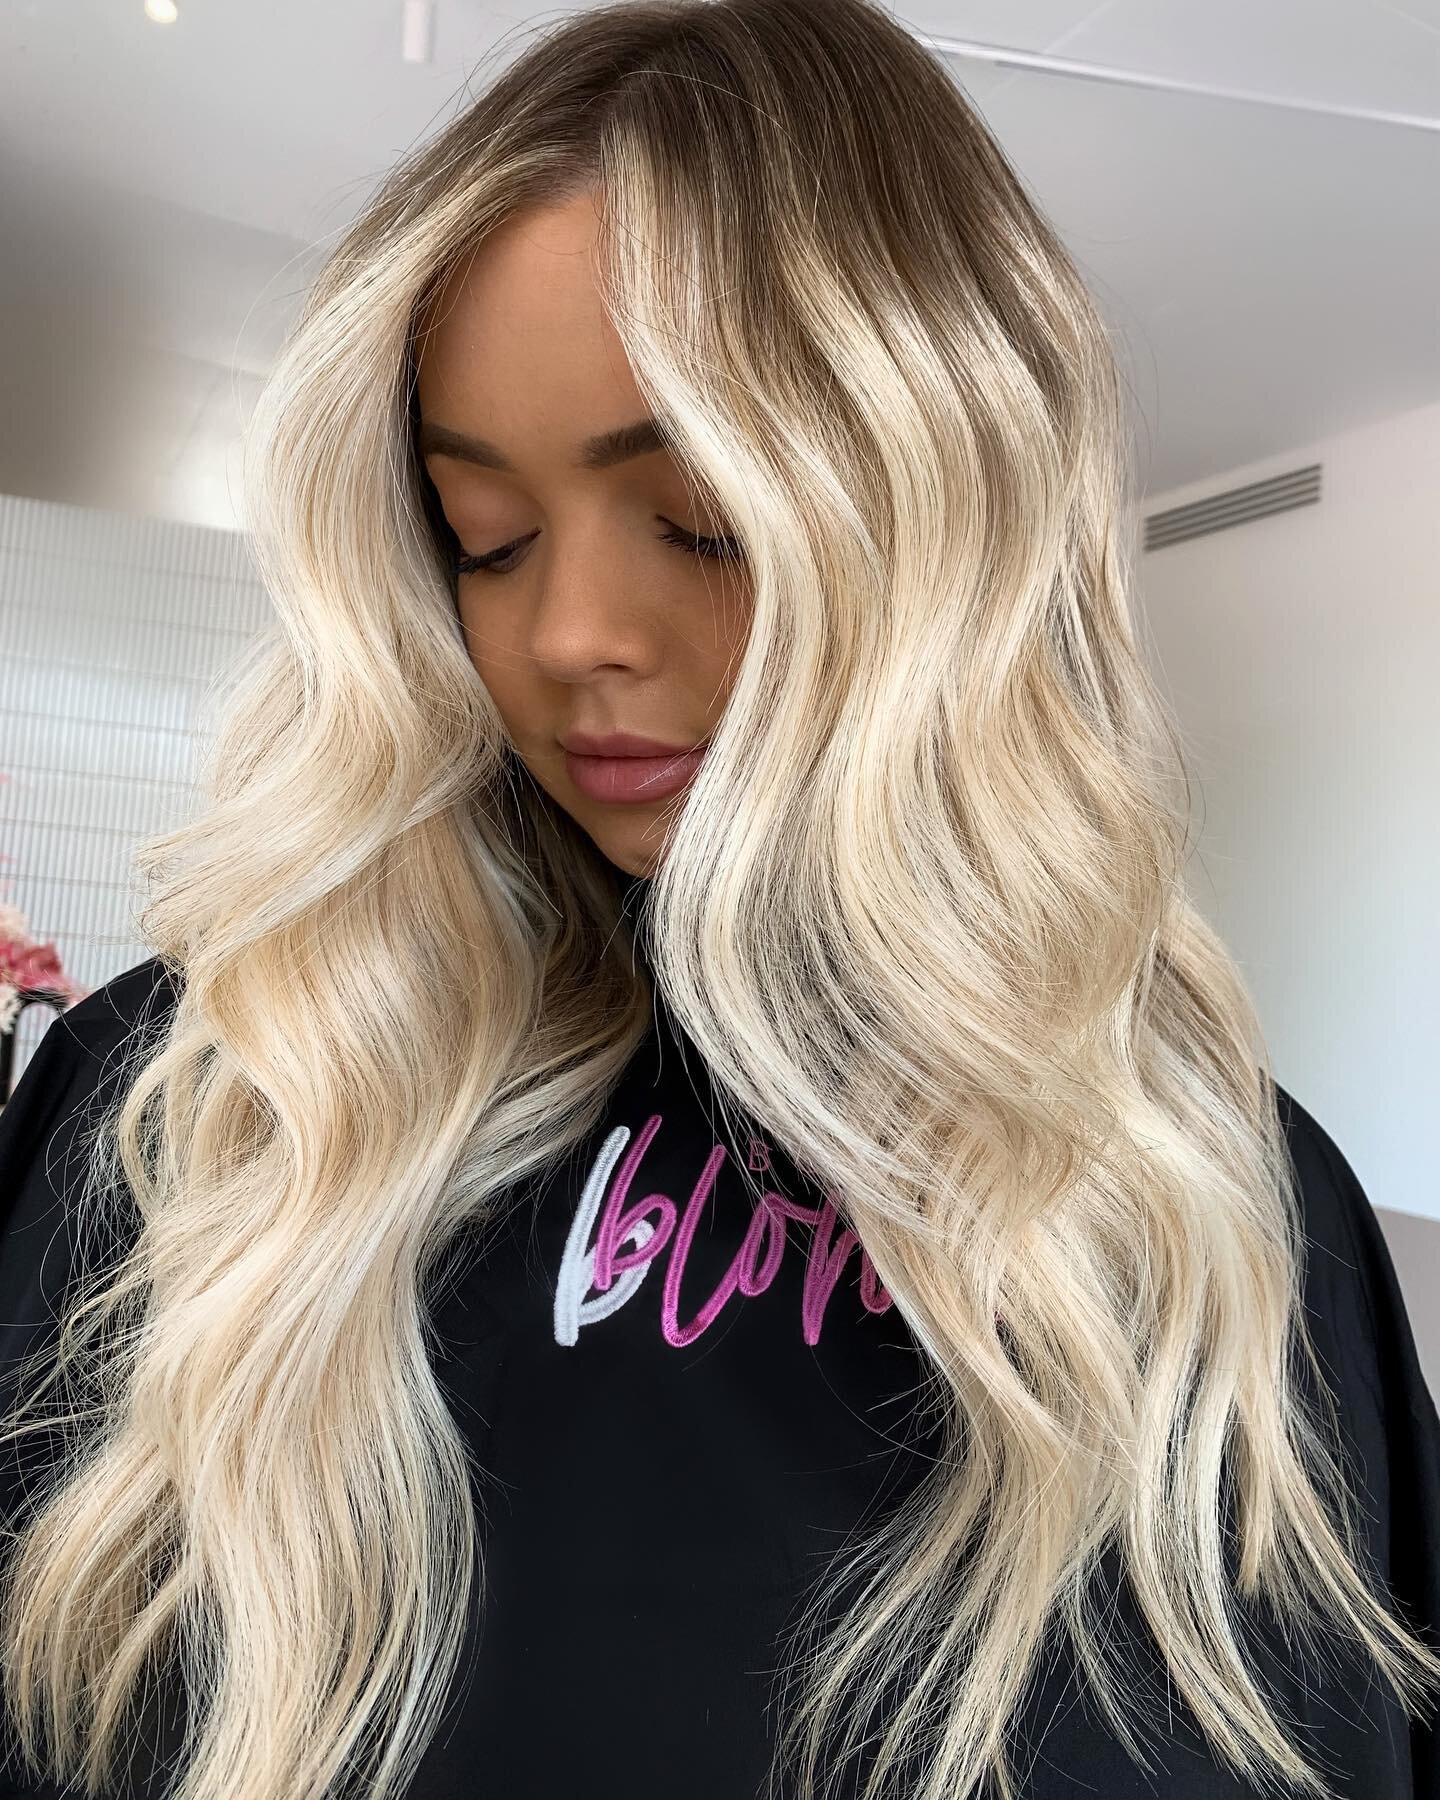 Low maintenance with dimension ⚡️⚡️⚡️ Are you guys a fan?? Let me know below 💕
.
.
.
.
.
#balayage #perthbalayage #balayagespecialists #balayageperth